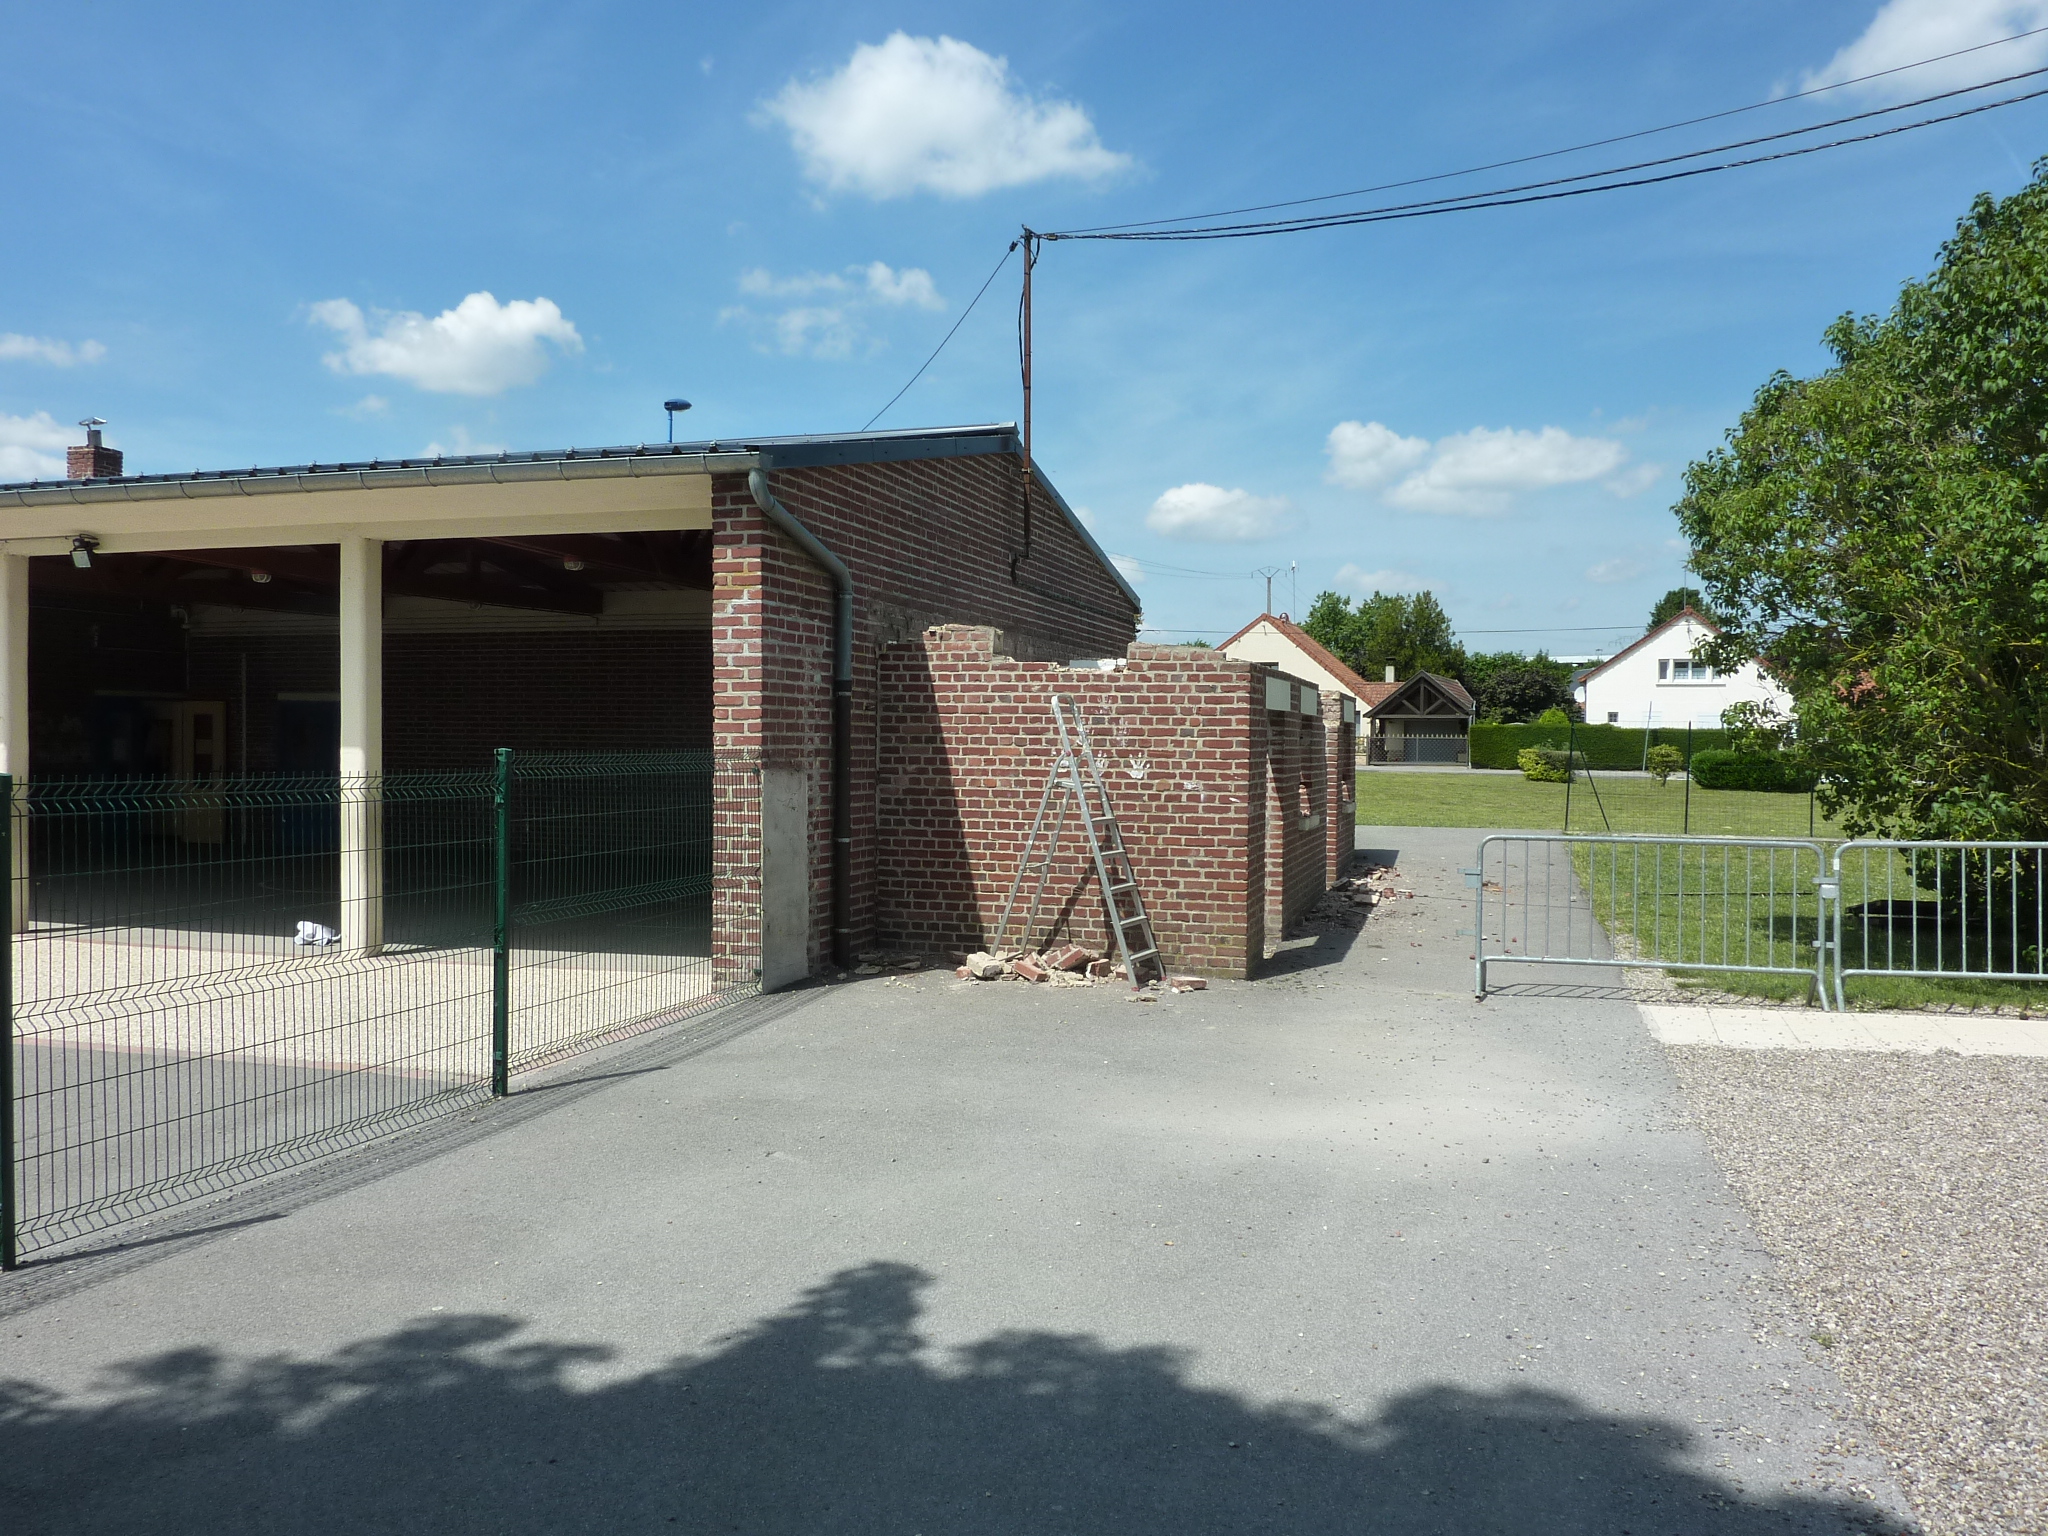 Cantine scolaire (9)